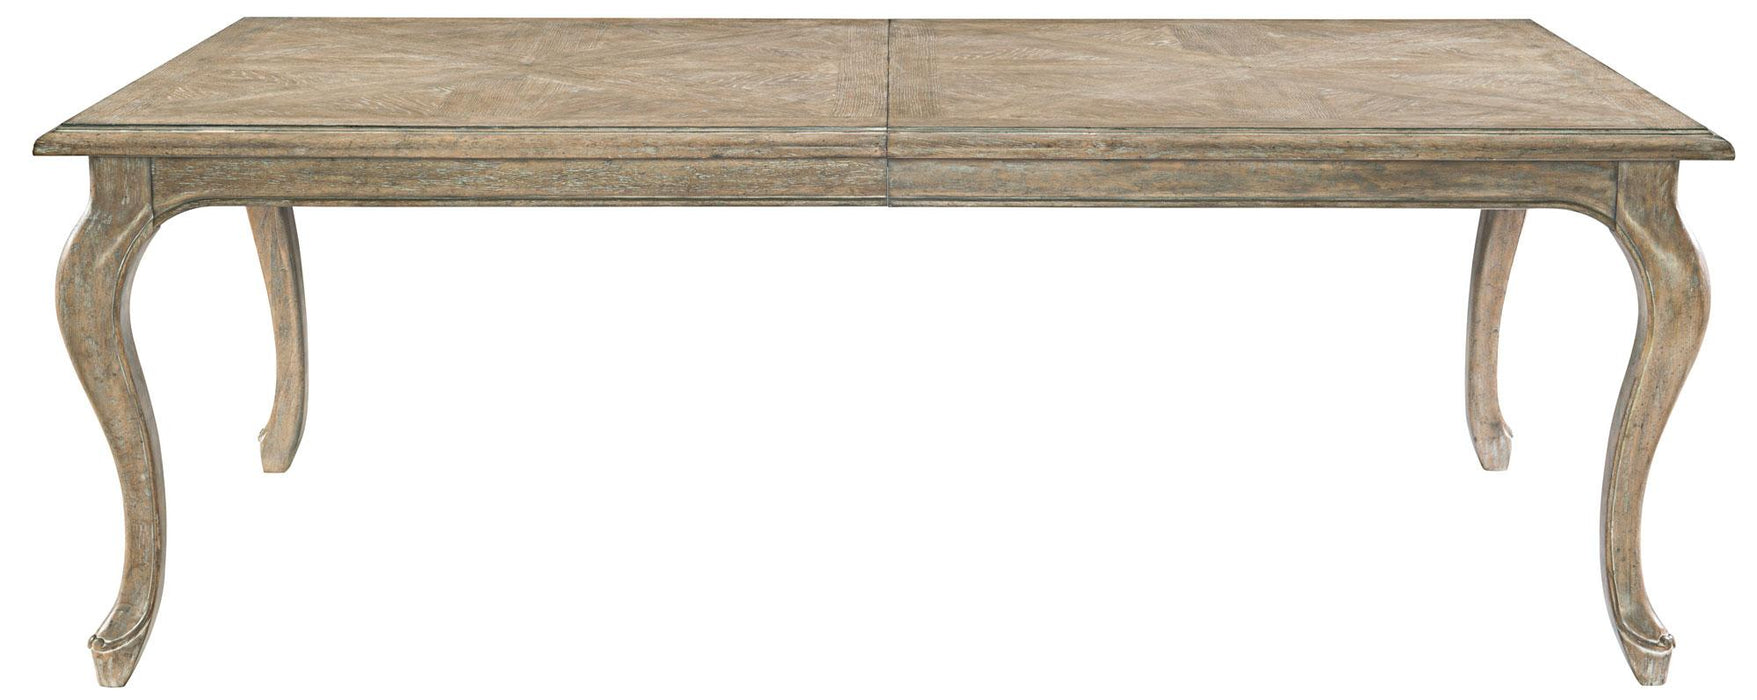 Bernhardt Campania Rectangular Dining Table in Weathered Sand 370-222 image